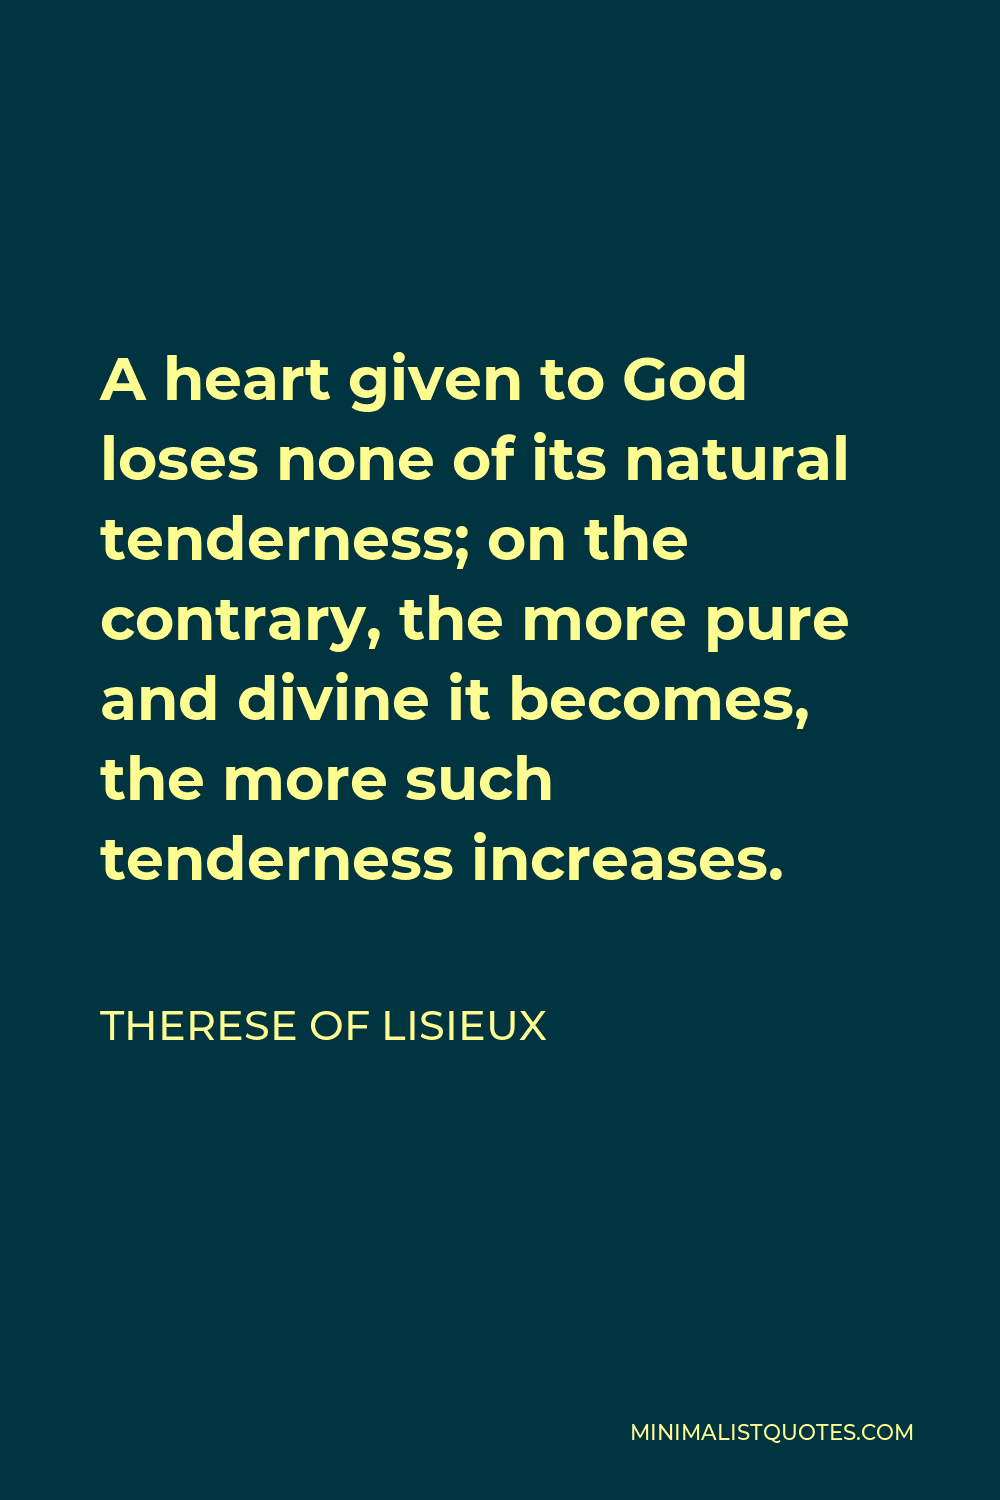 Therese of Lisieux Quote - A heart given to God loses none of its natural tenderness; on the contrary, the more pure and divine it becomes, the more such tenderness increases.